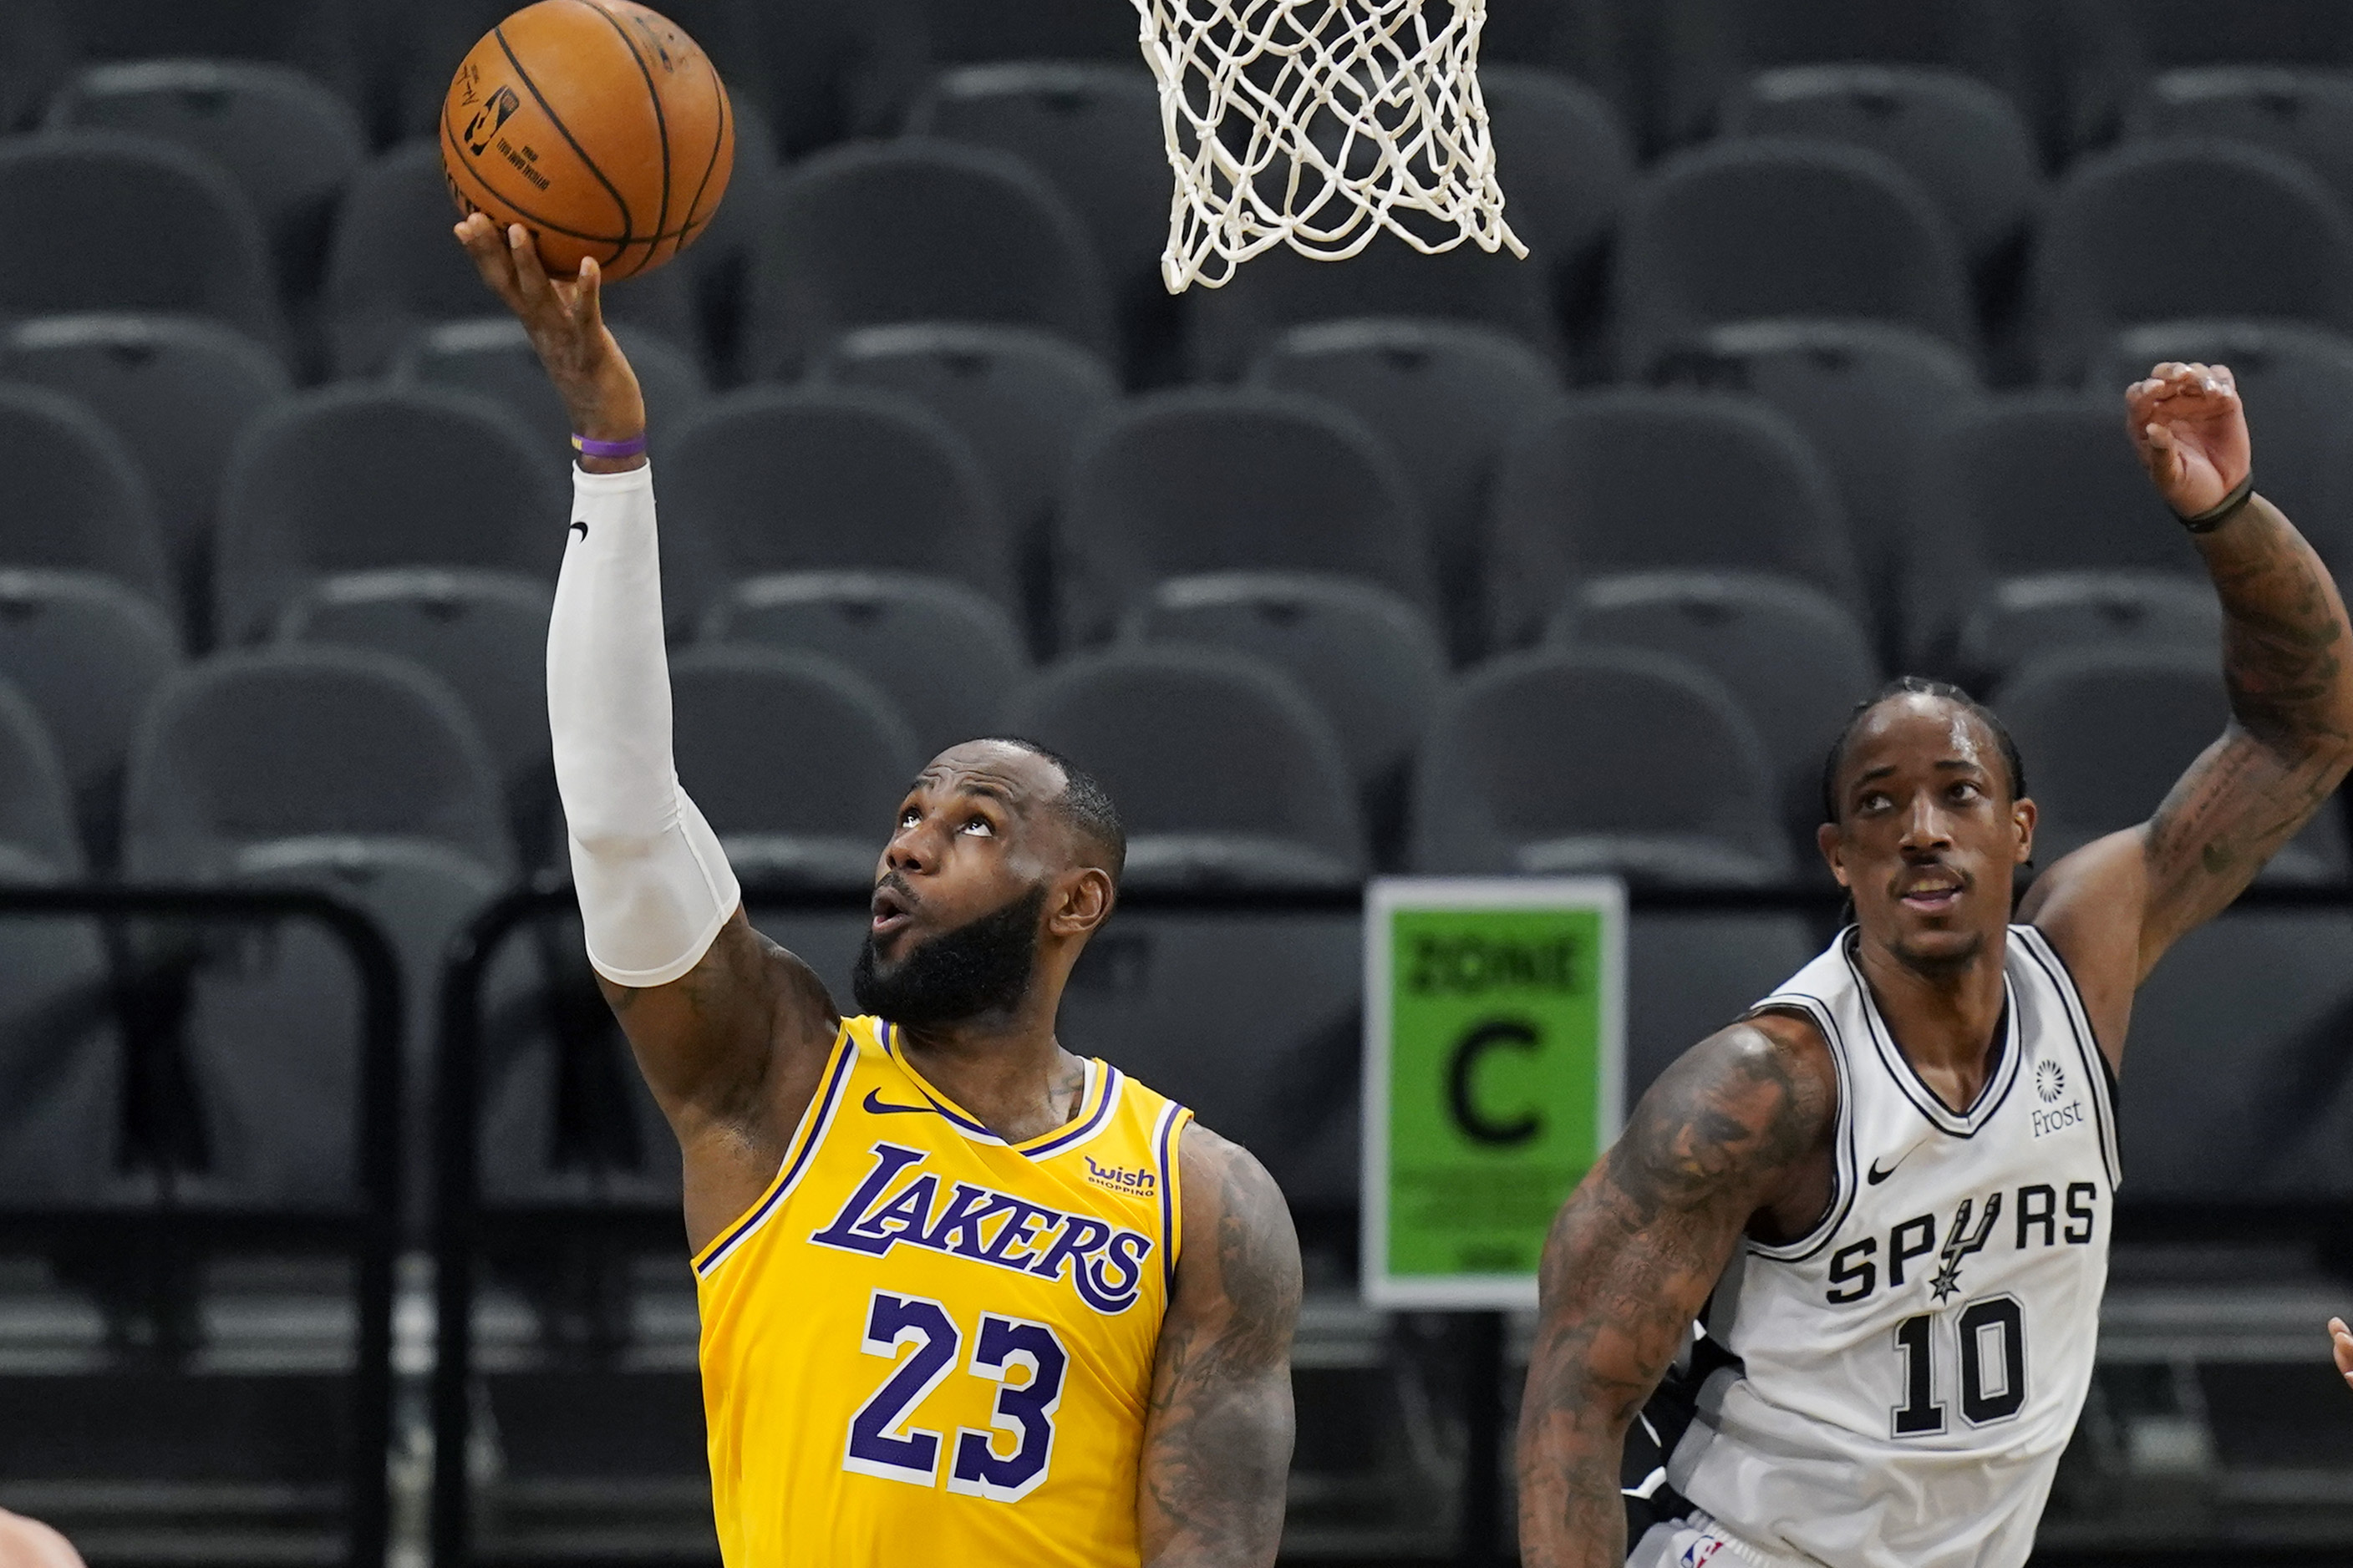 Lakers Lebron James Reaches Double Digit Scoring In Record 1 000 Straight Games Bleacher Report Latest News Videos And Highlights